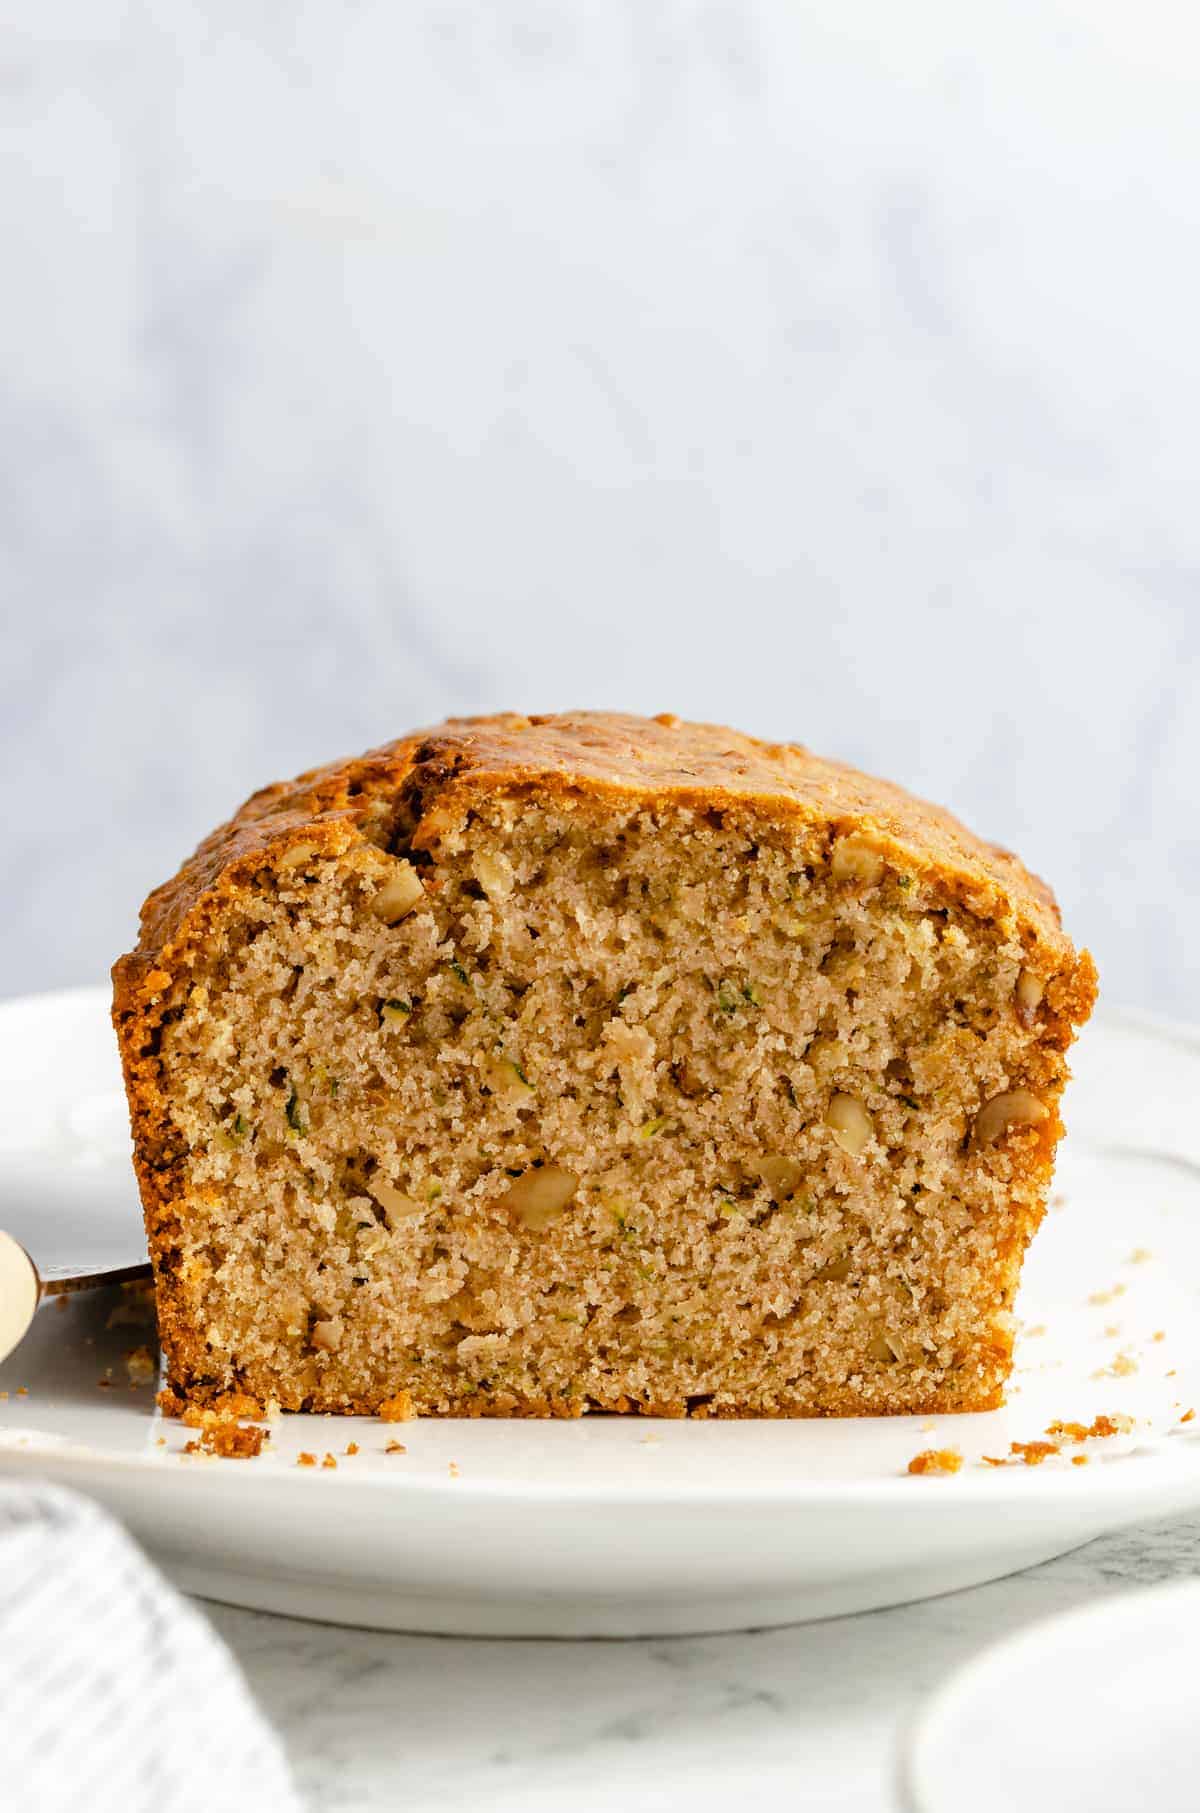 Loaf of bread with grated zucchini and walnuts.